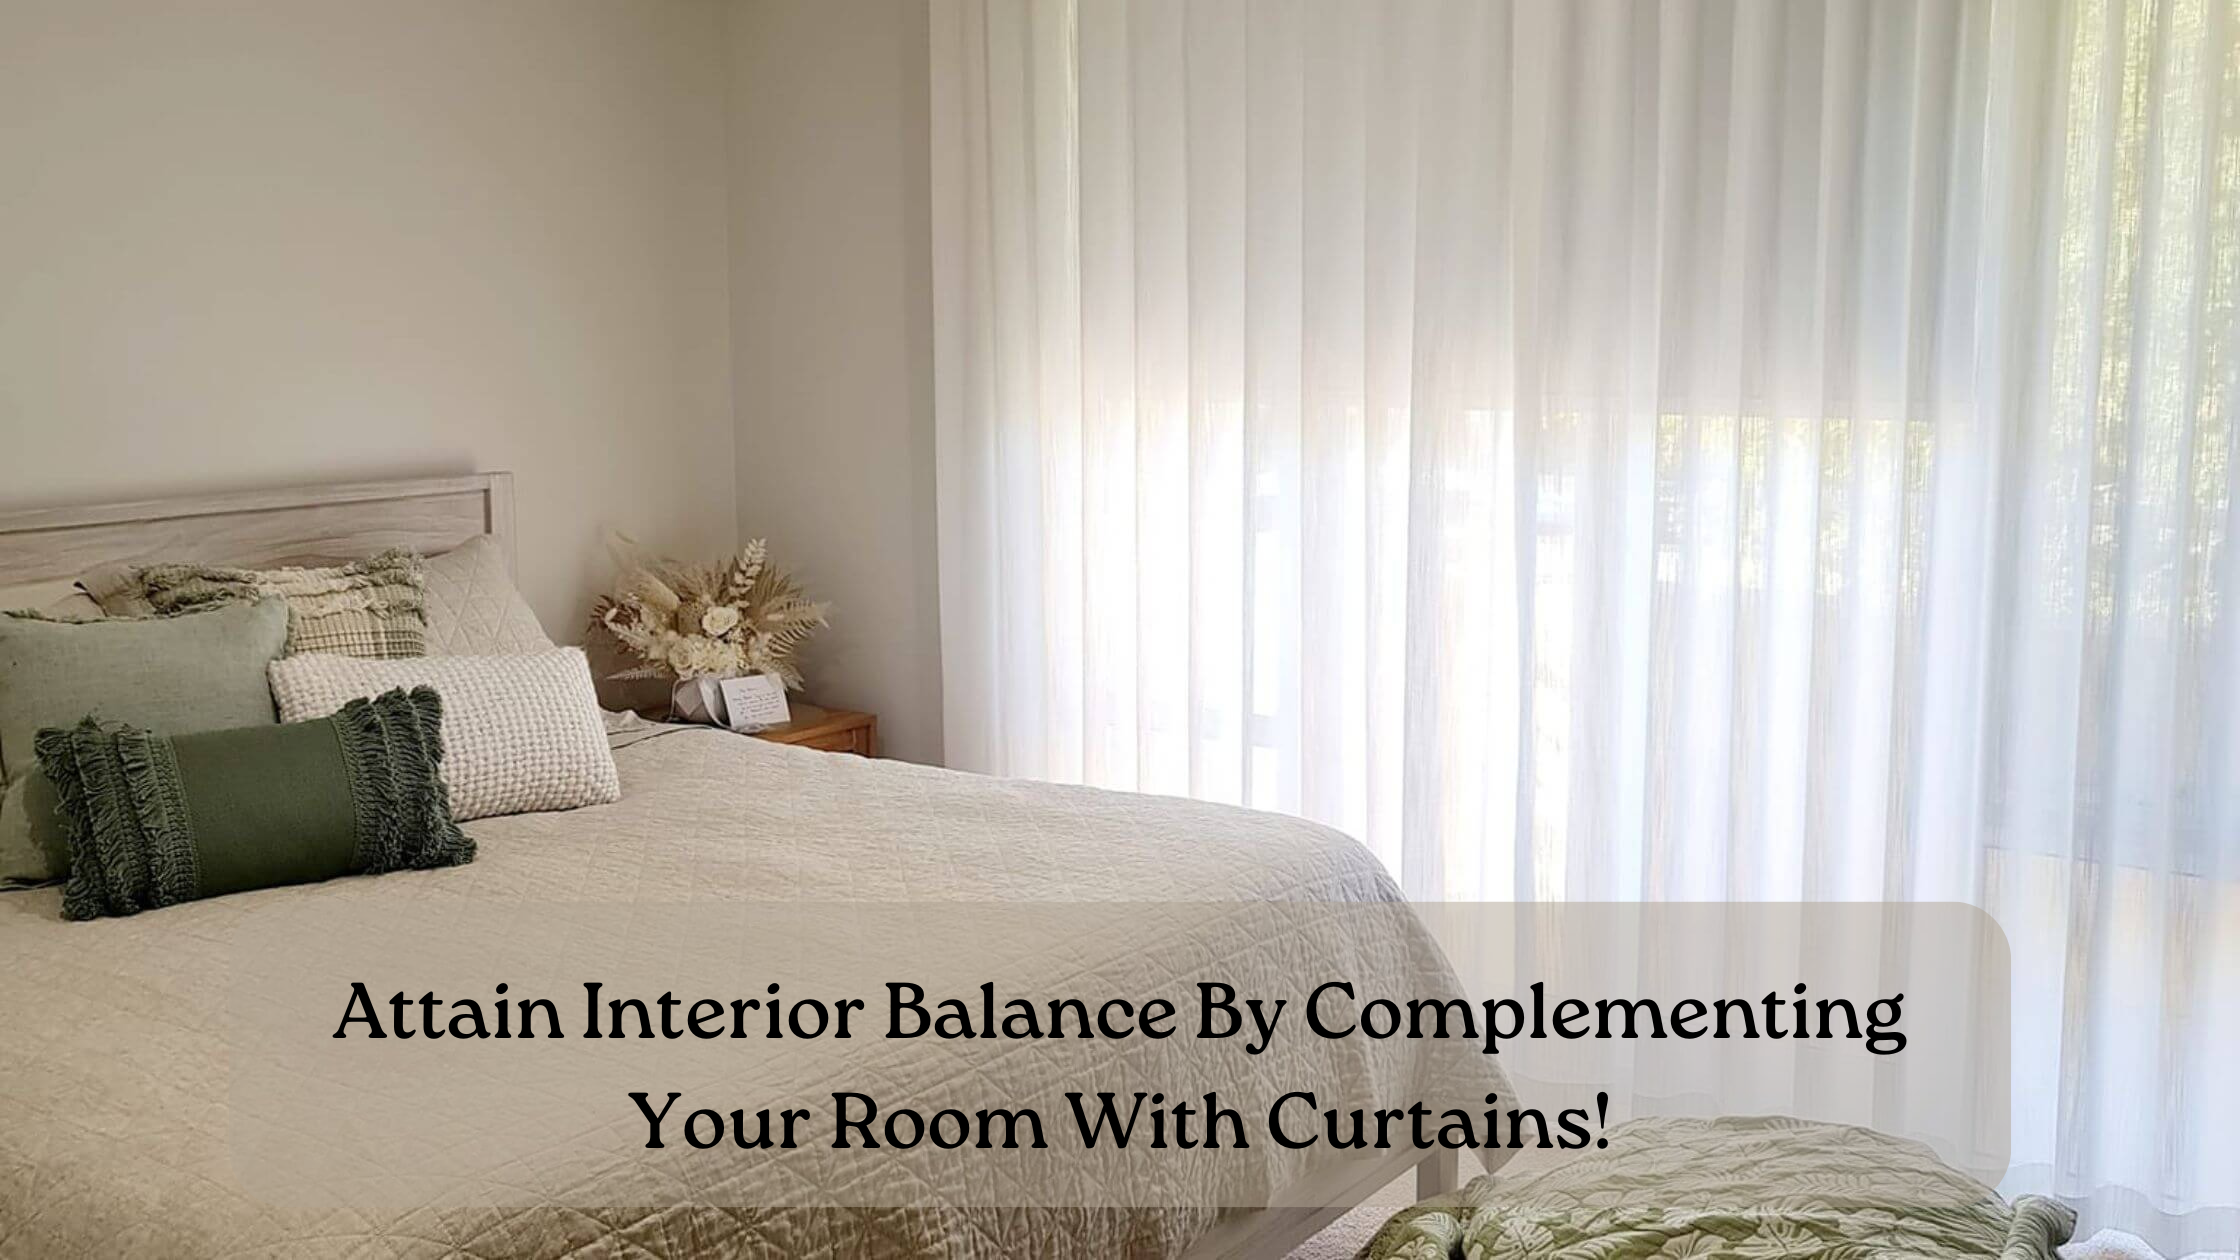 How To Match Curtains To The Interior Style of Your Home?